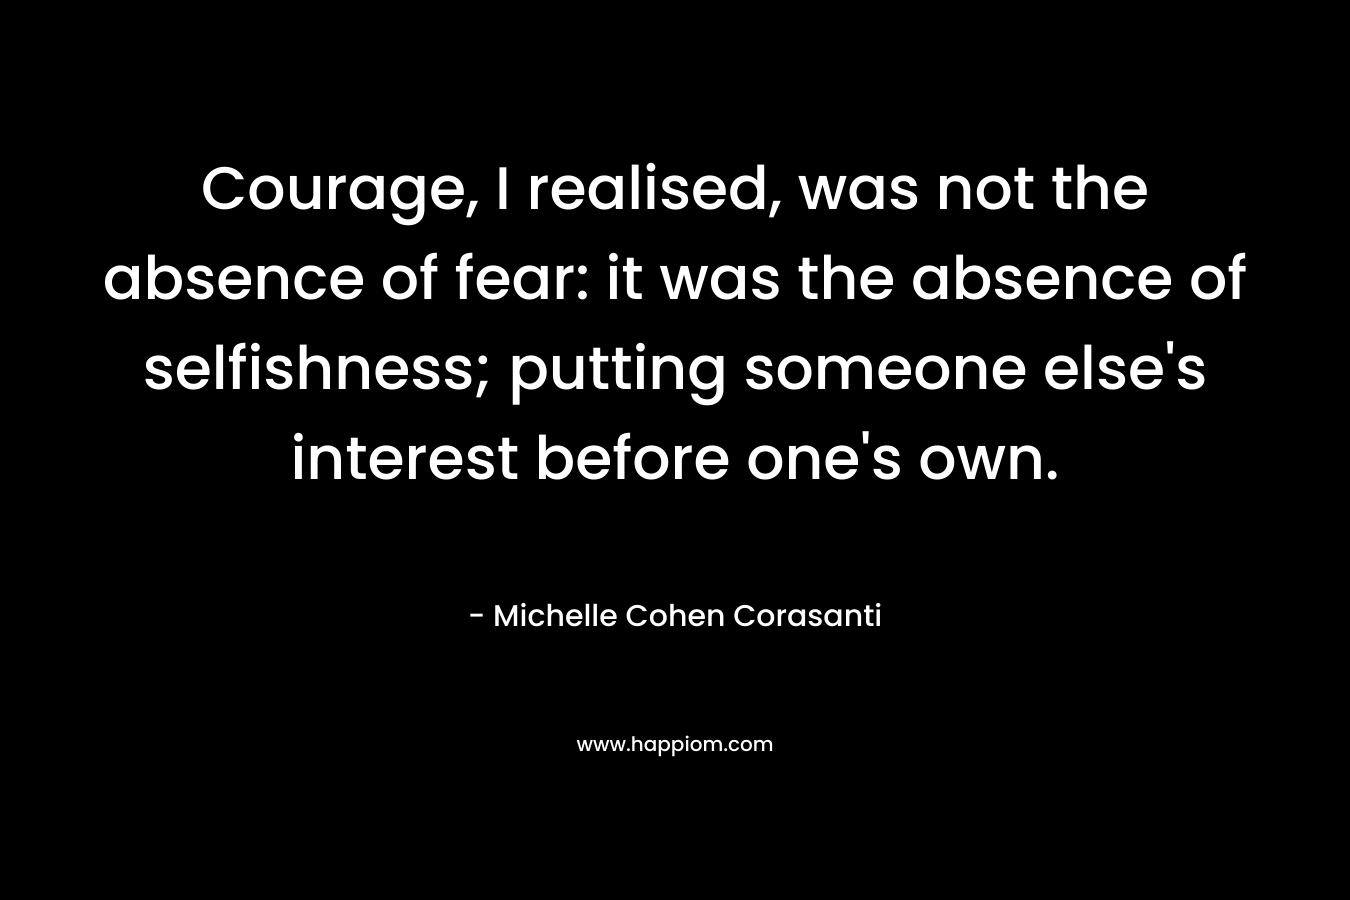 Courage, I realised, was not the absence of fear: it was the absence of selfishness; putting someone else's interest before one's own.